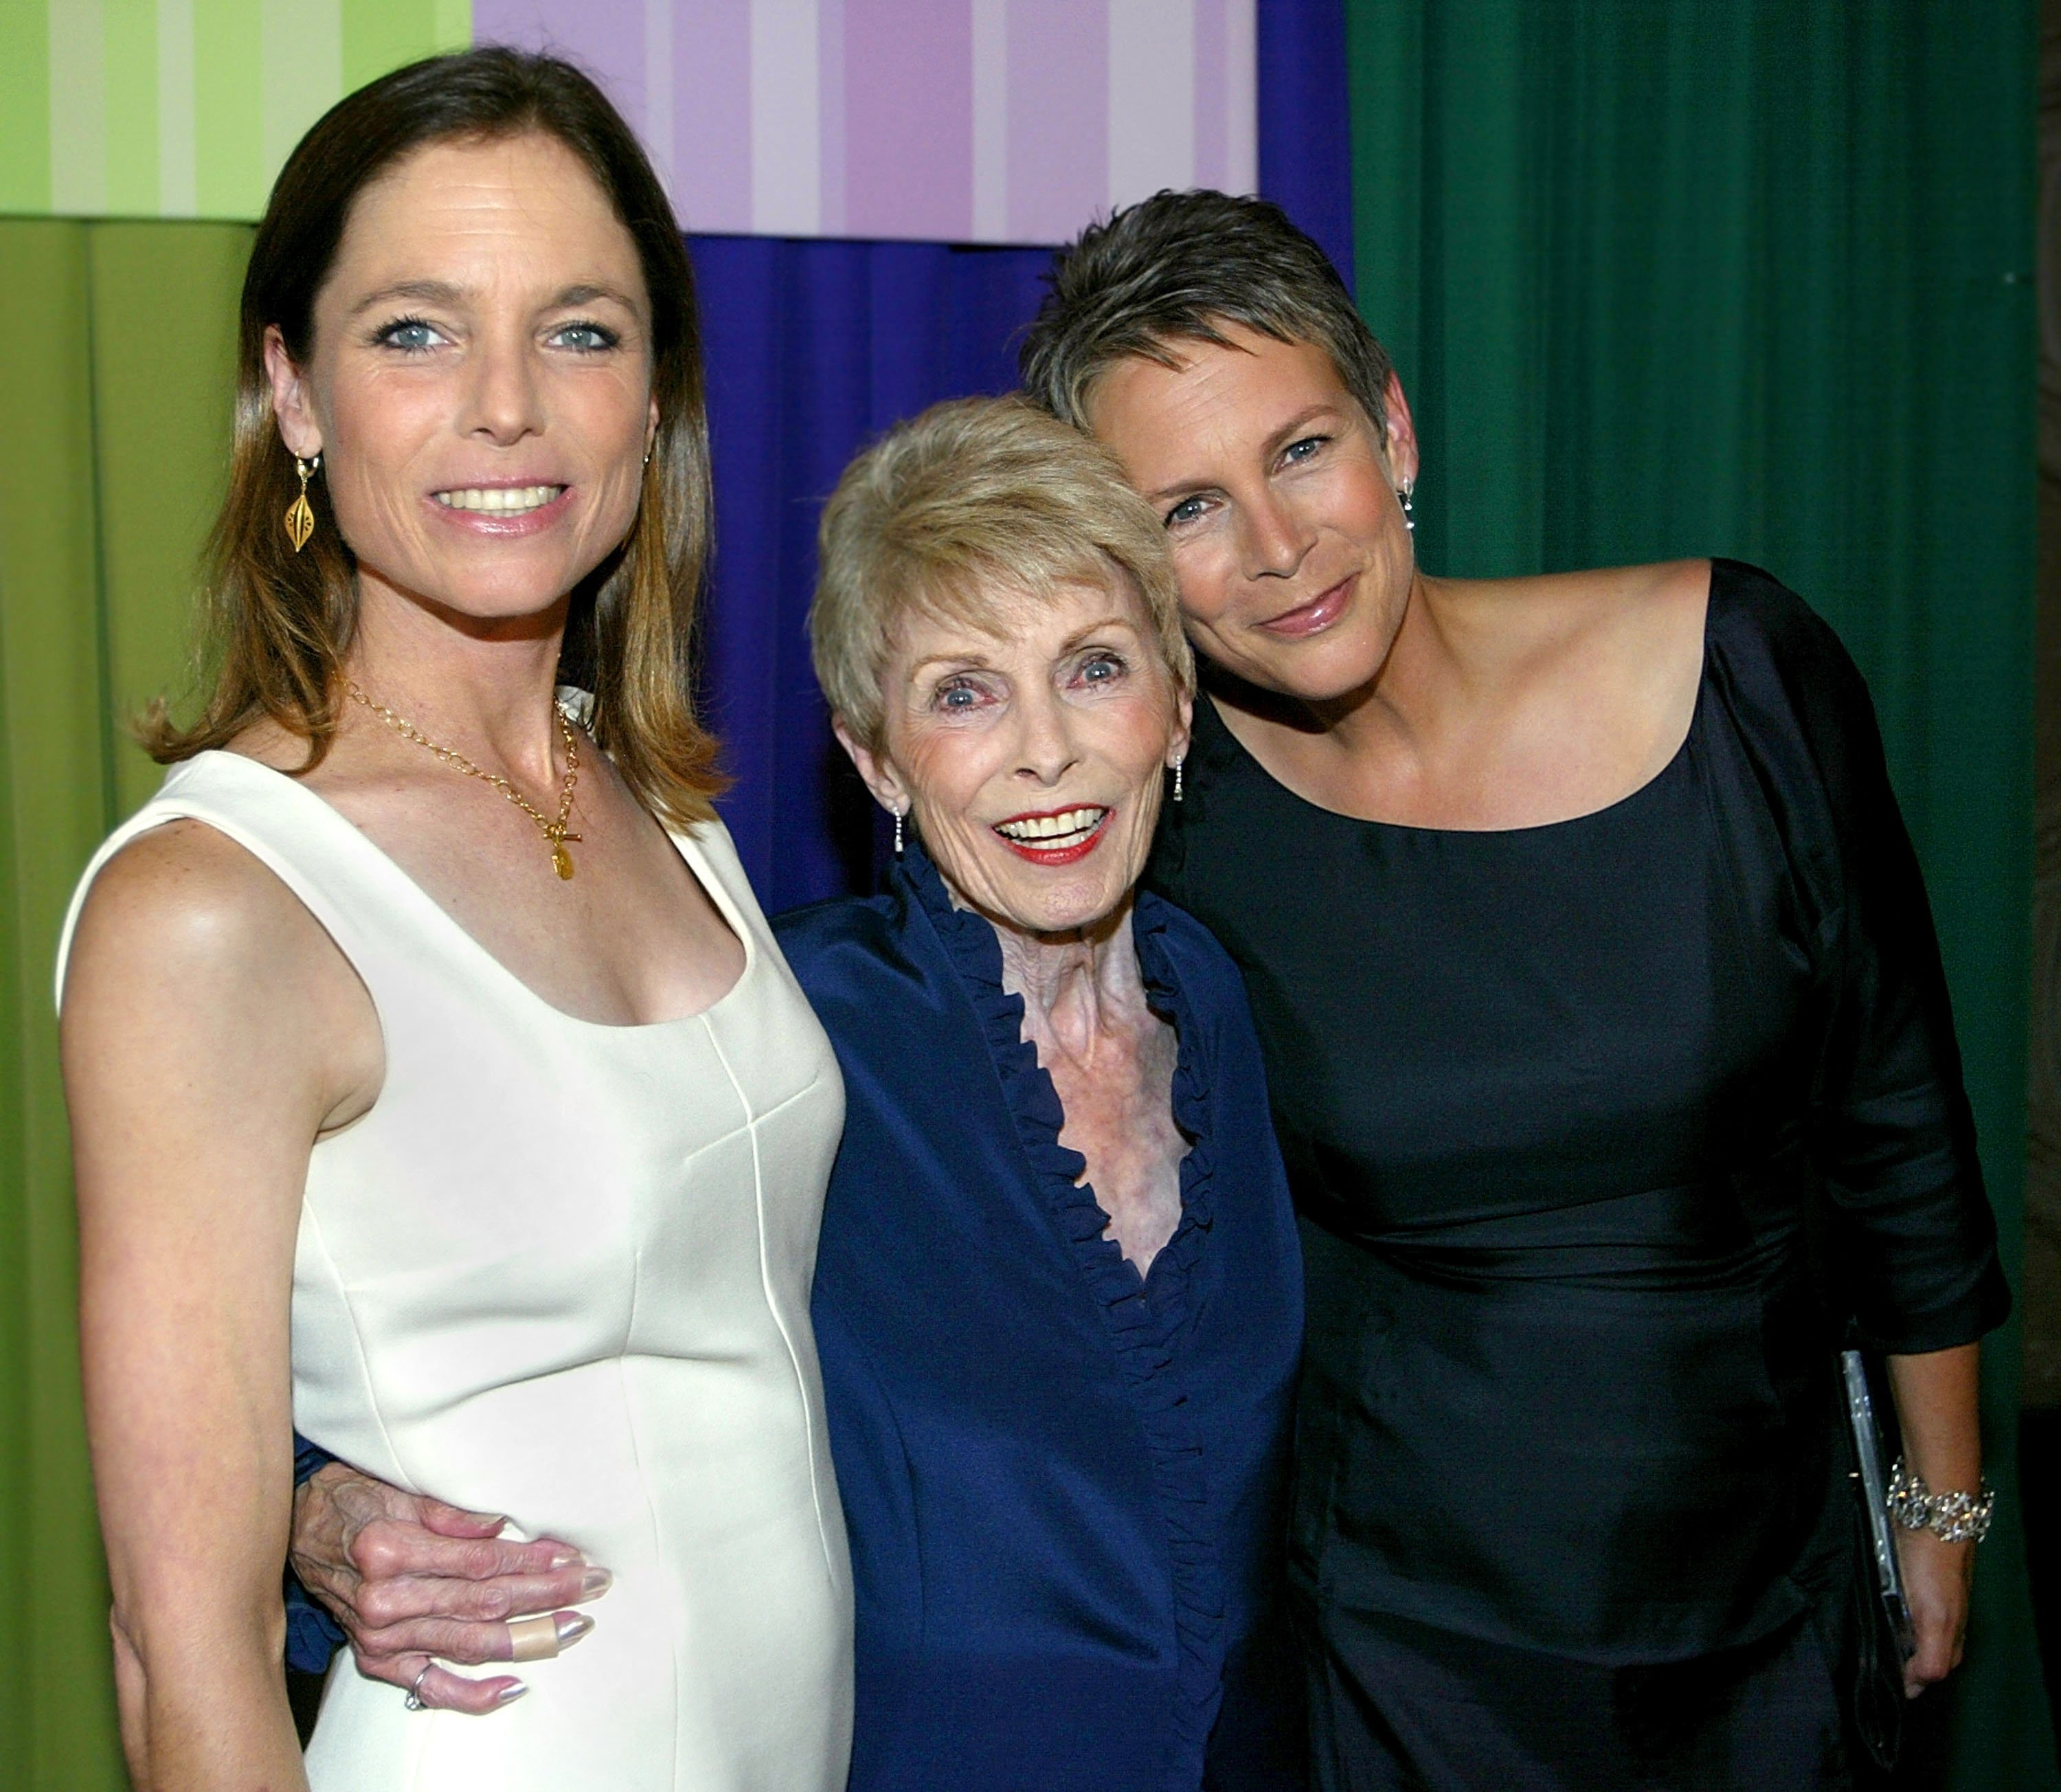 Jamie Lee Curtis poses with mother Janet Leigh and sister Kelly Leigh before the premiere of the film "Freaky Friday" at the El Capitan theater August 4, 2003, in Hollywood, California. | Source: Getty Images.